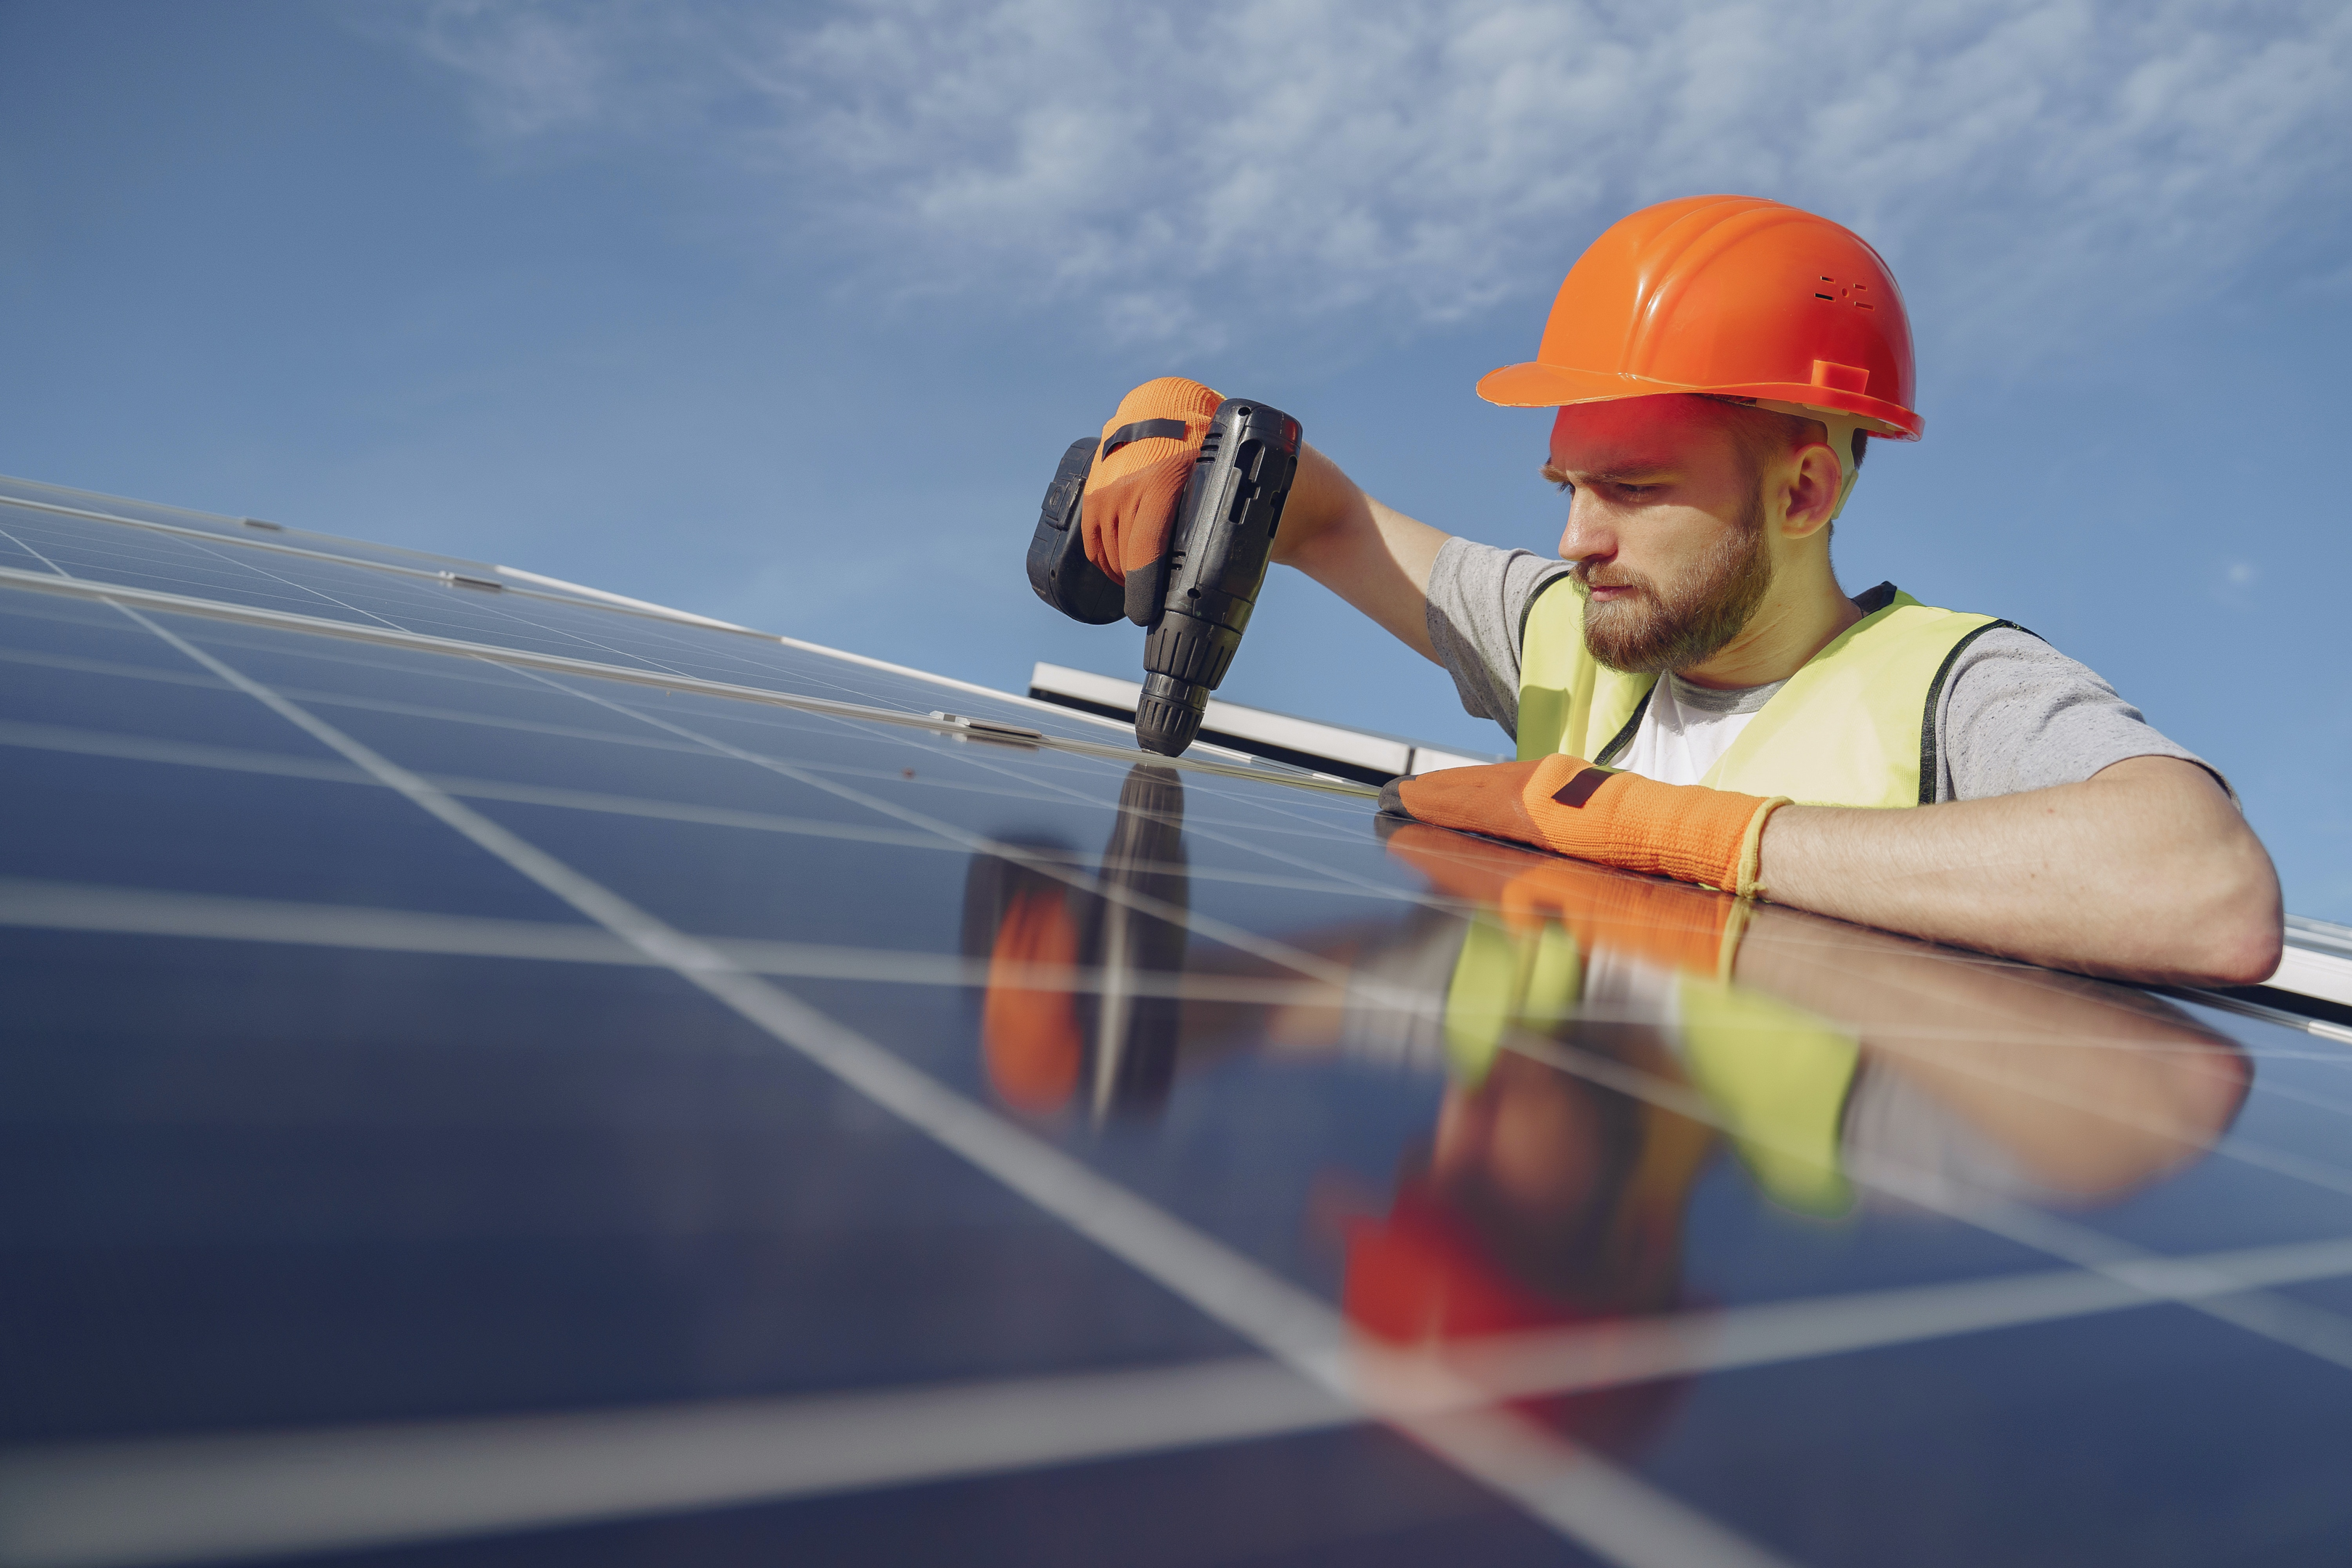 A man holds a drill on a roof while repairing a solar panel installation.